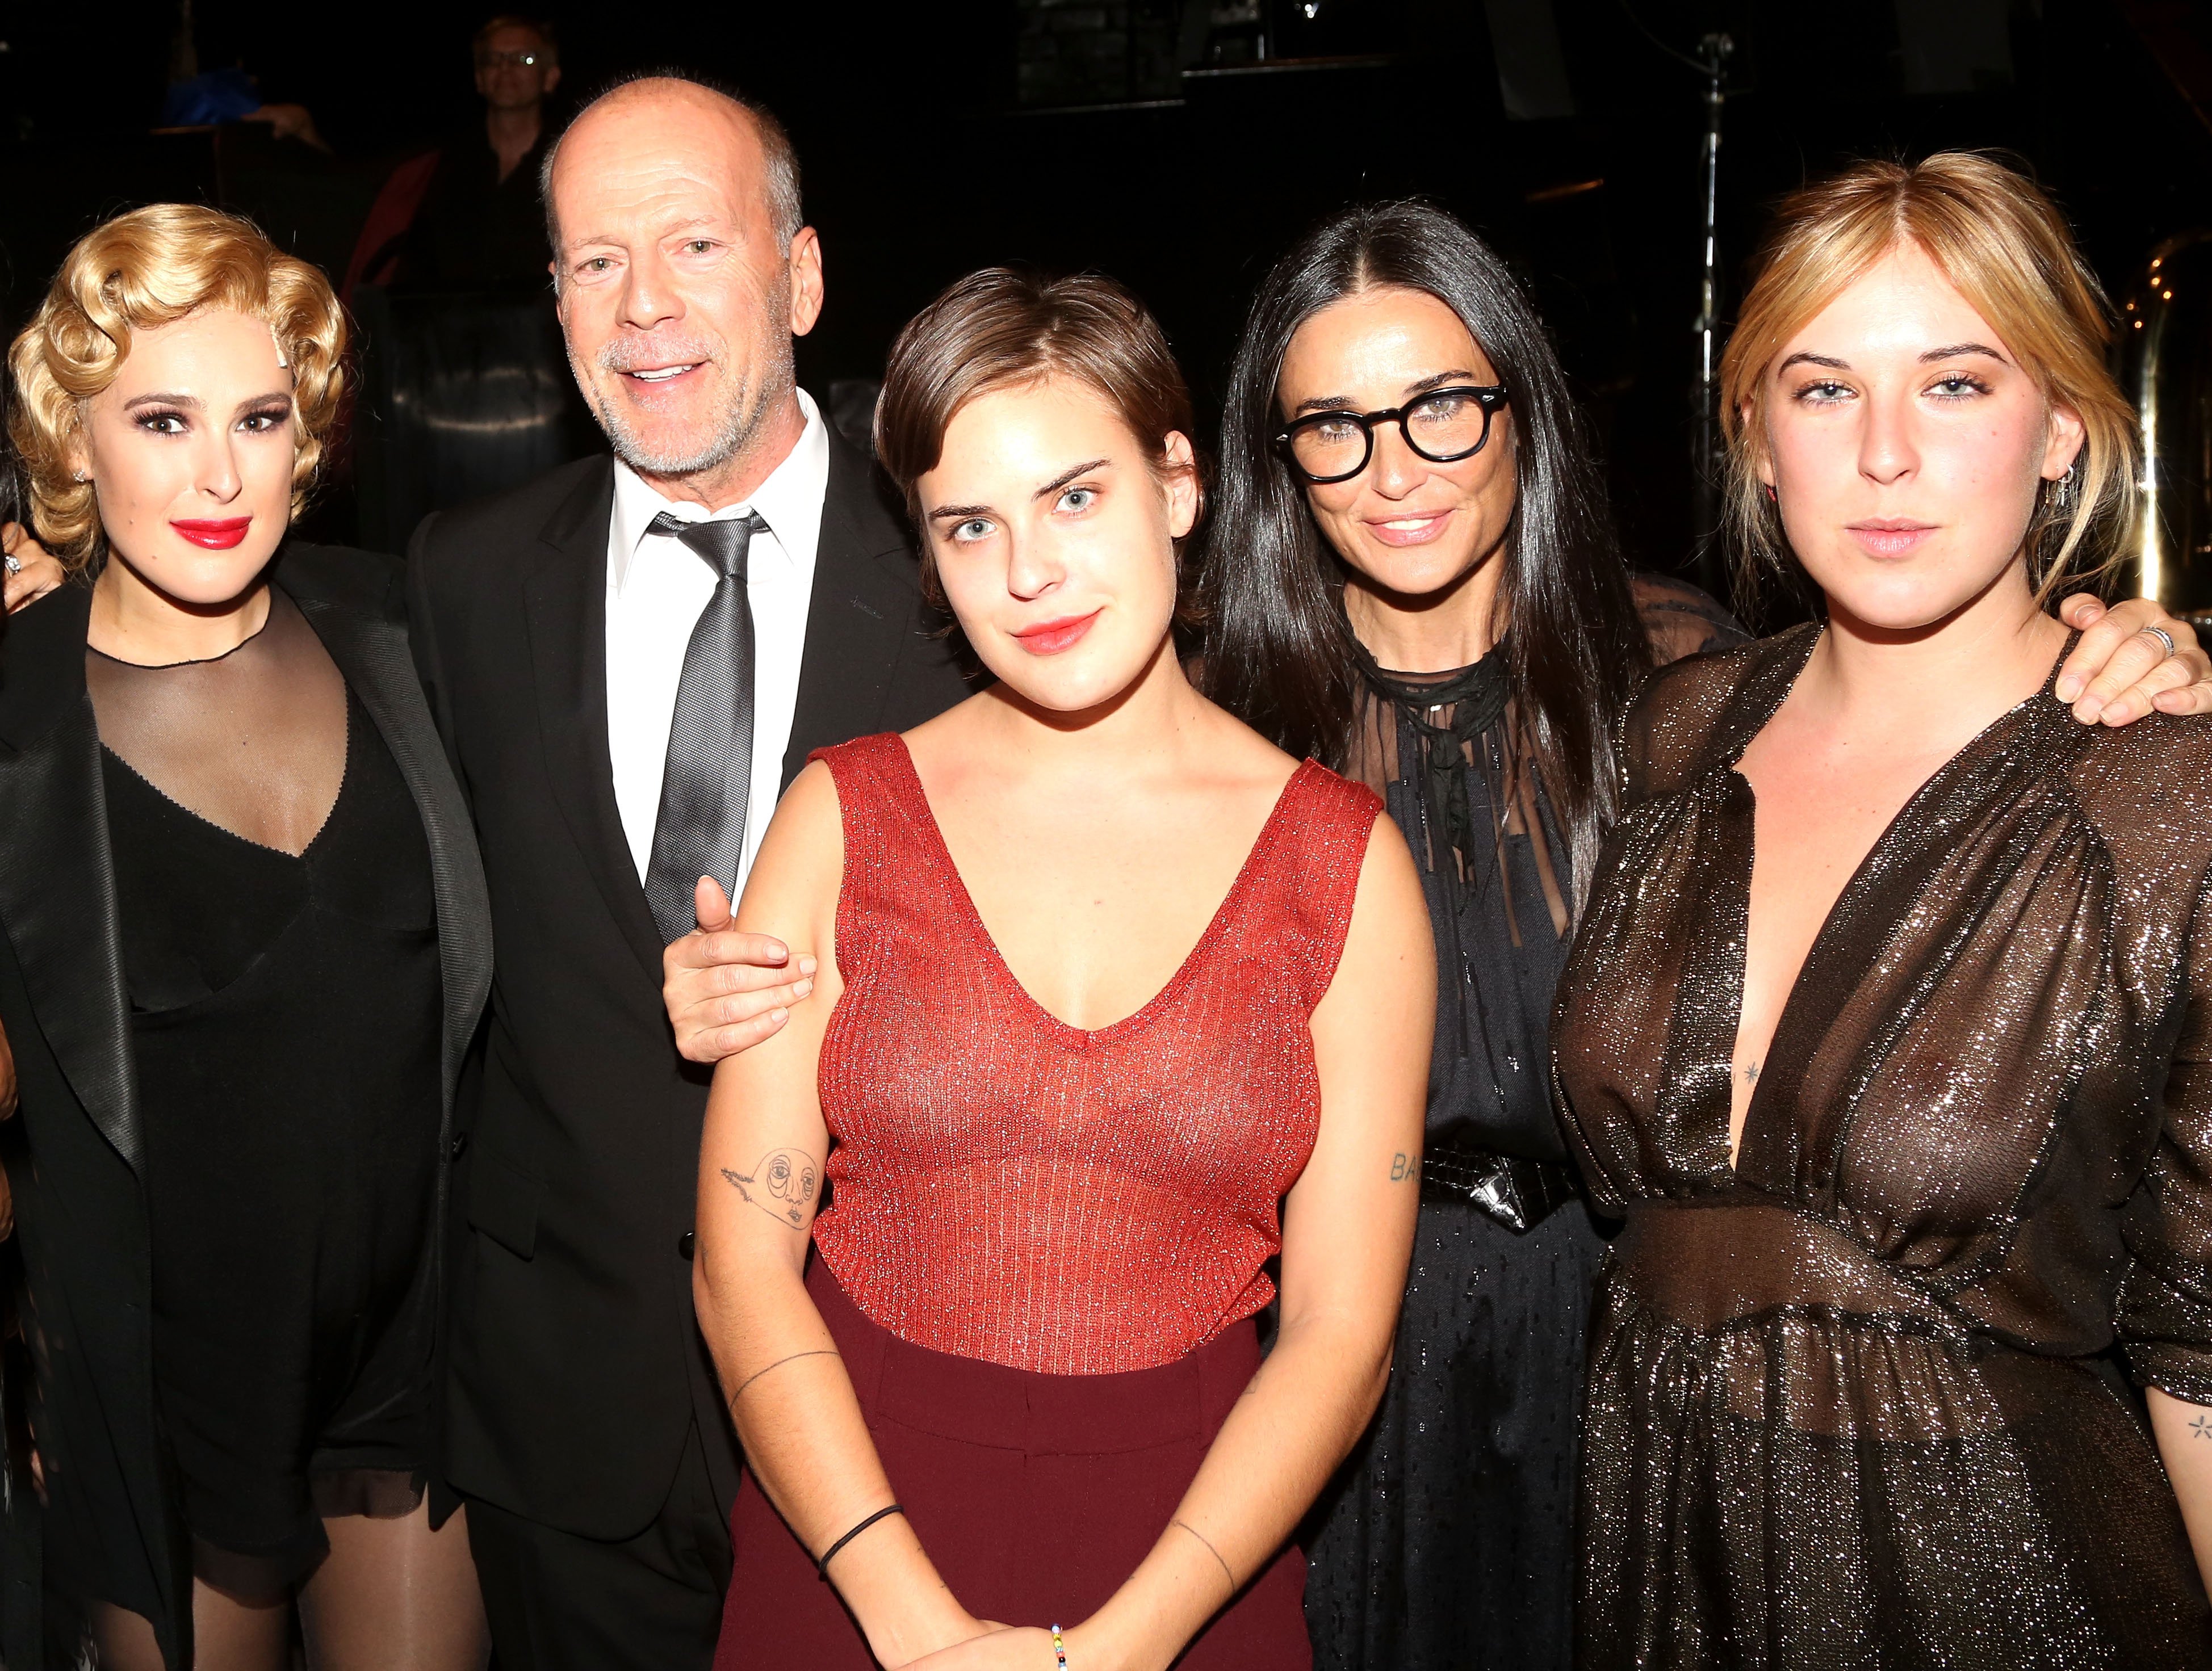 (L-R) Rumer Willis, Bruce Willis, Tallulah Willis, Demi Moore, and Scout Willis pose backstage at The Ambassador Theater on September 21, 2015 in New York City. | Source: Getty Images